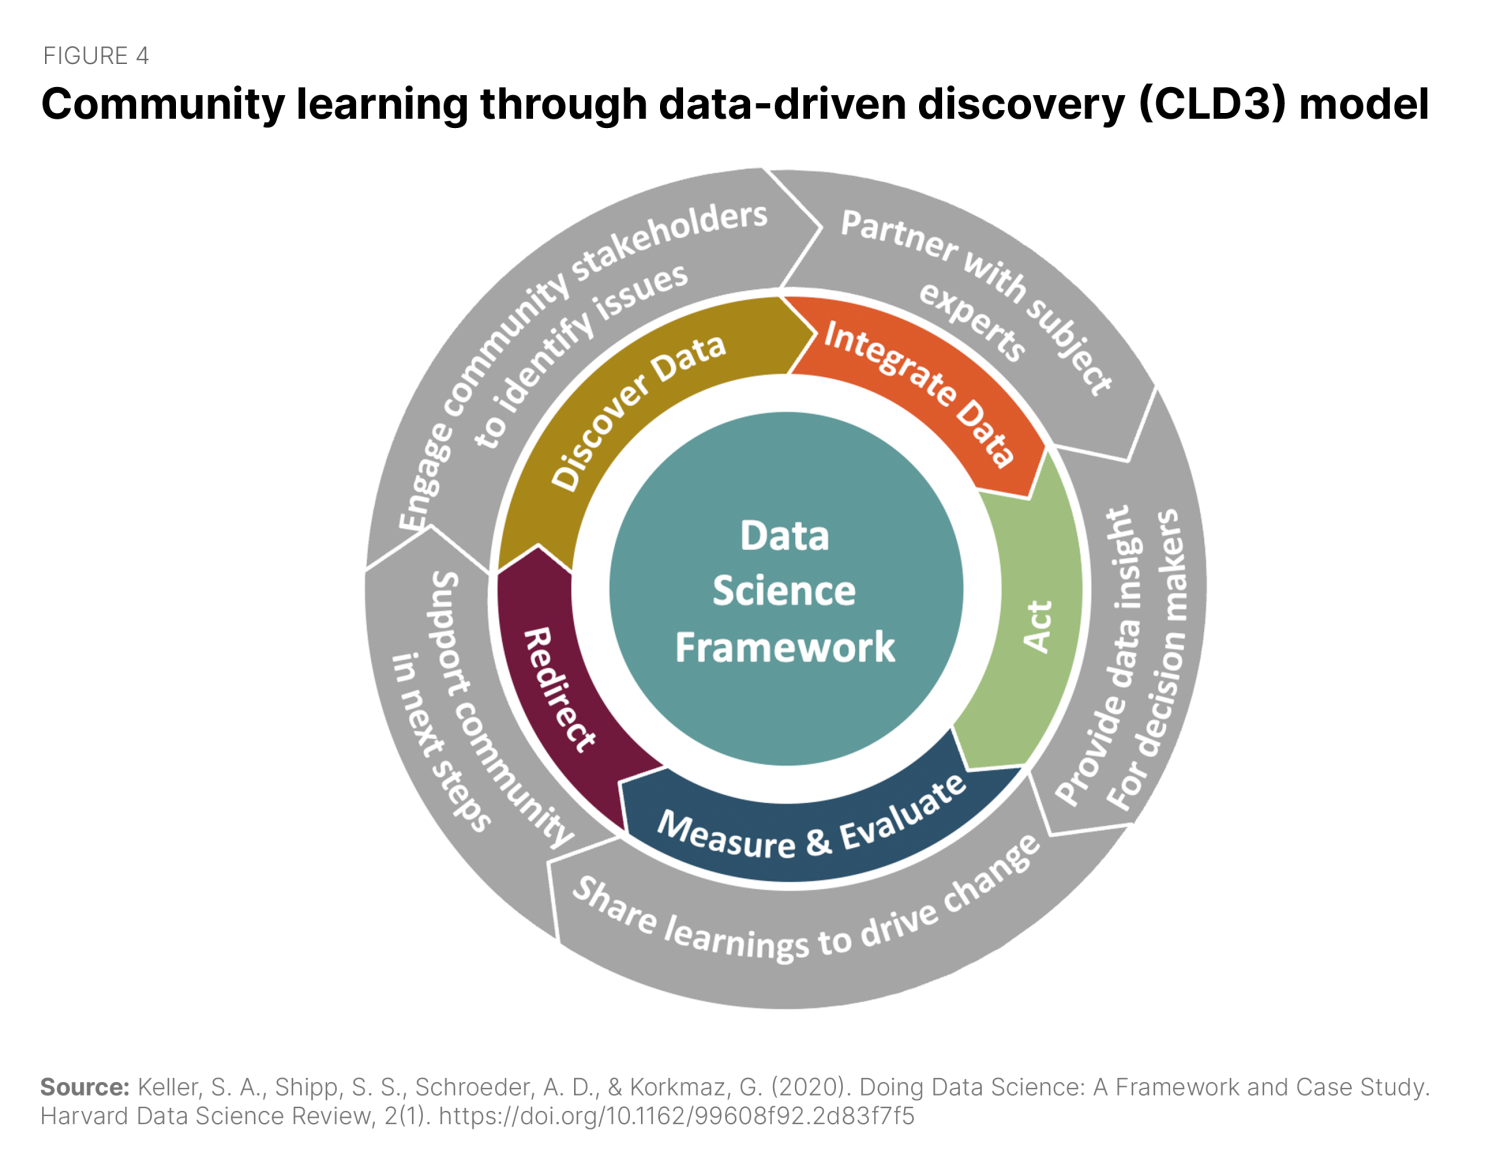 Community learning through data driven discovery (CLD3) model